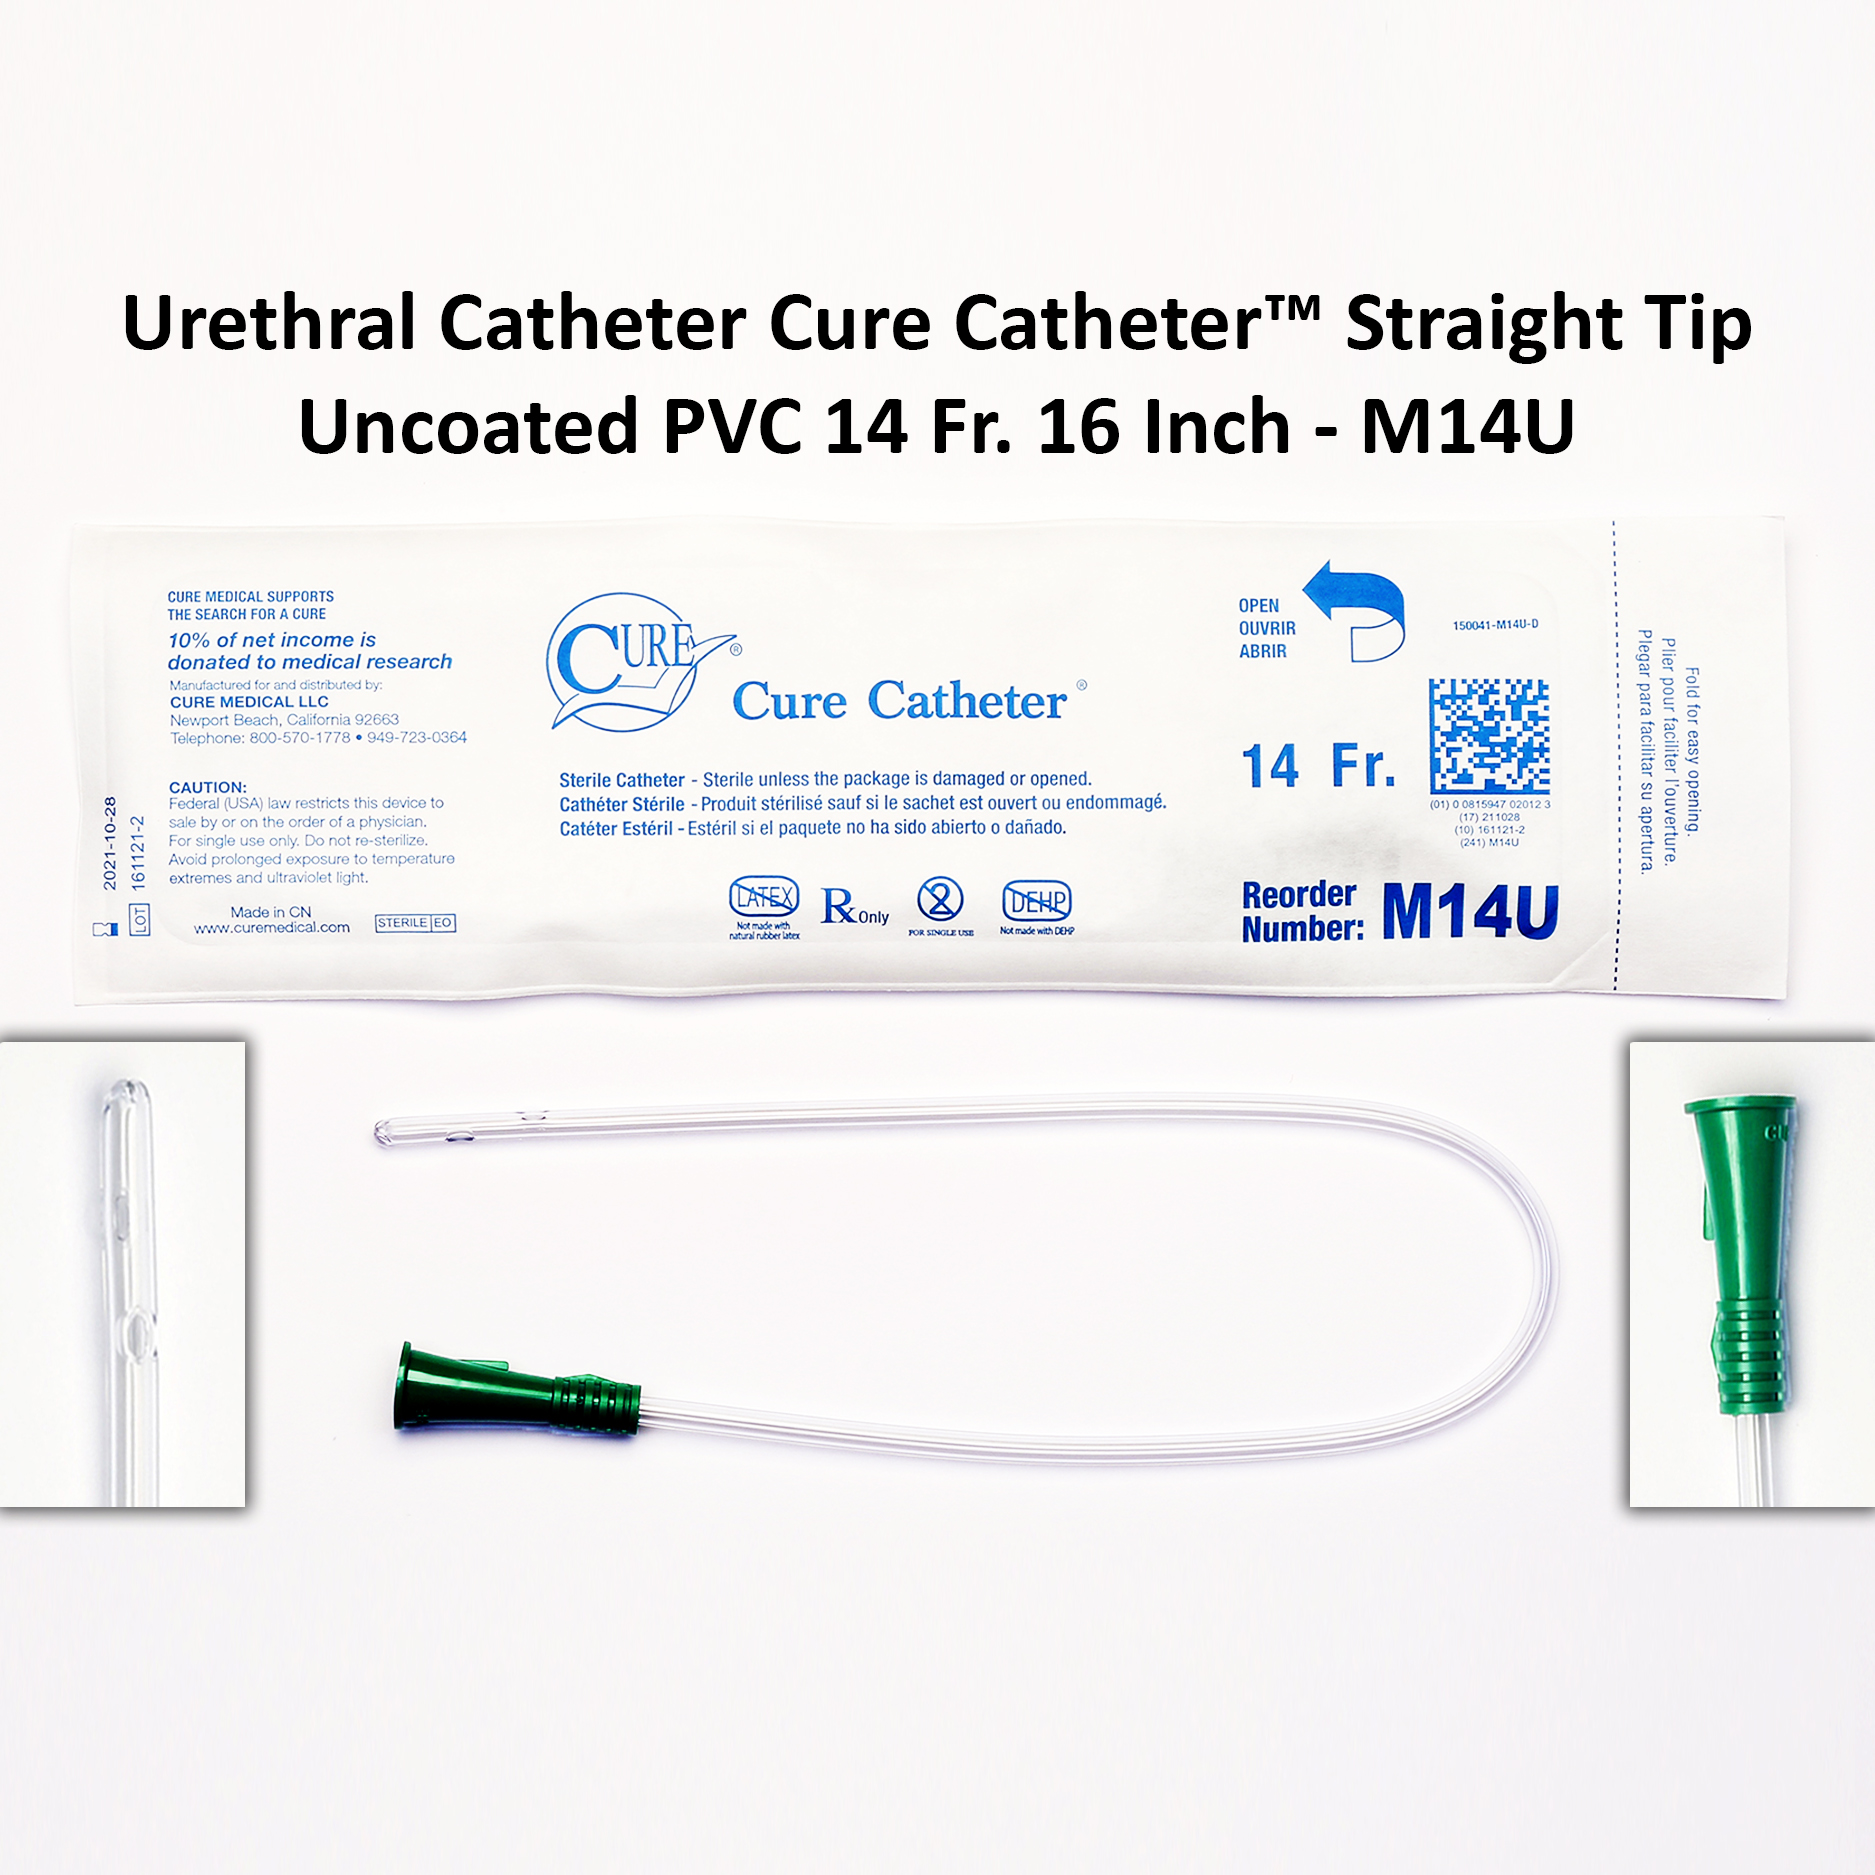 Urethral Catheter Cure Catheter™ Straight Tip Uncoated PVC 14 Fr. 16 Inch - M14U